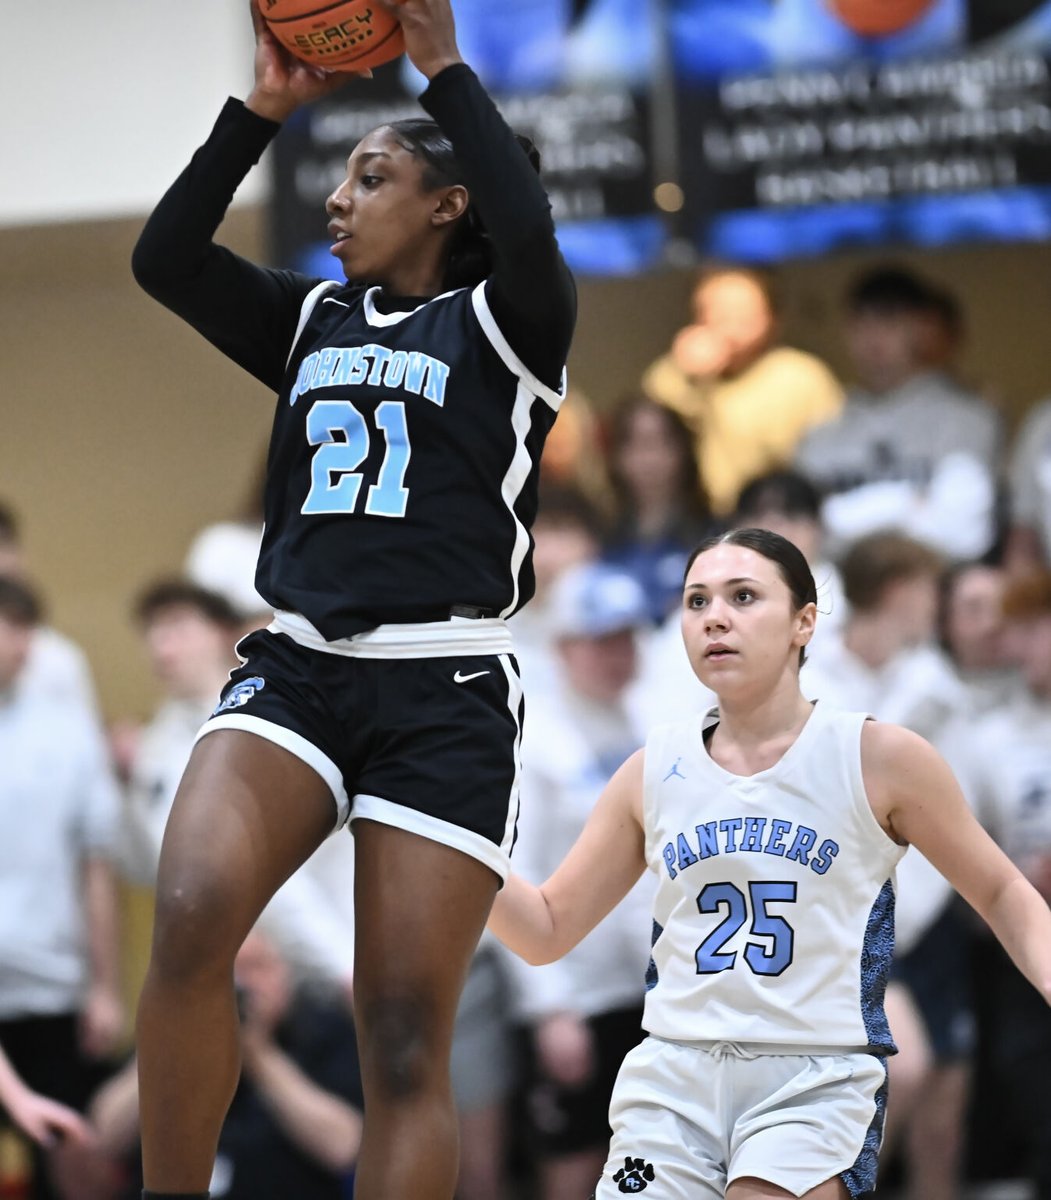 @GJSDAthletics’ NaLonai Tisinger (left) receives a high pass while guarded by @PennCambria’s Kyra Vinglish during a PIAA District VI class 4A semifinal in Cresson, Wednesday night. The Trojans won 65-55.